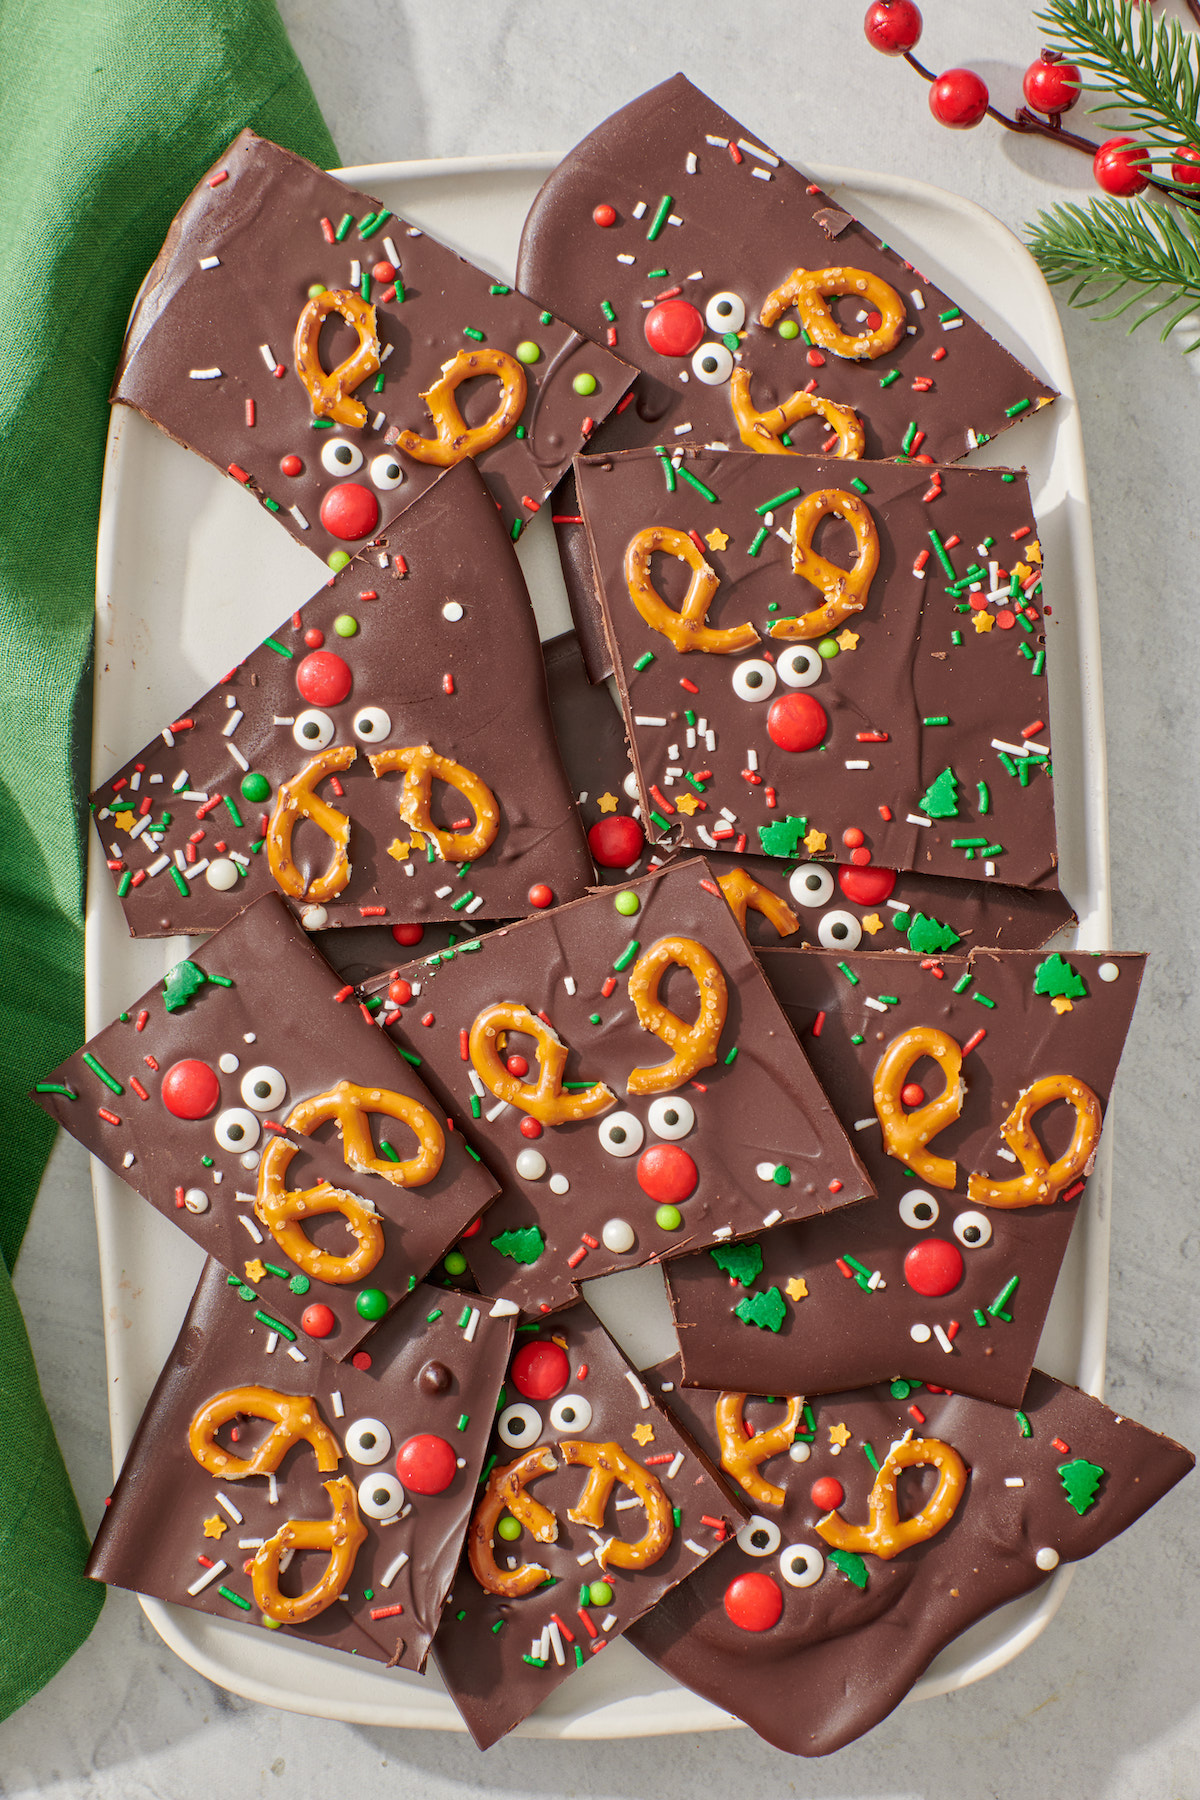 Chocolate Bark with reindeer faces.